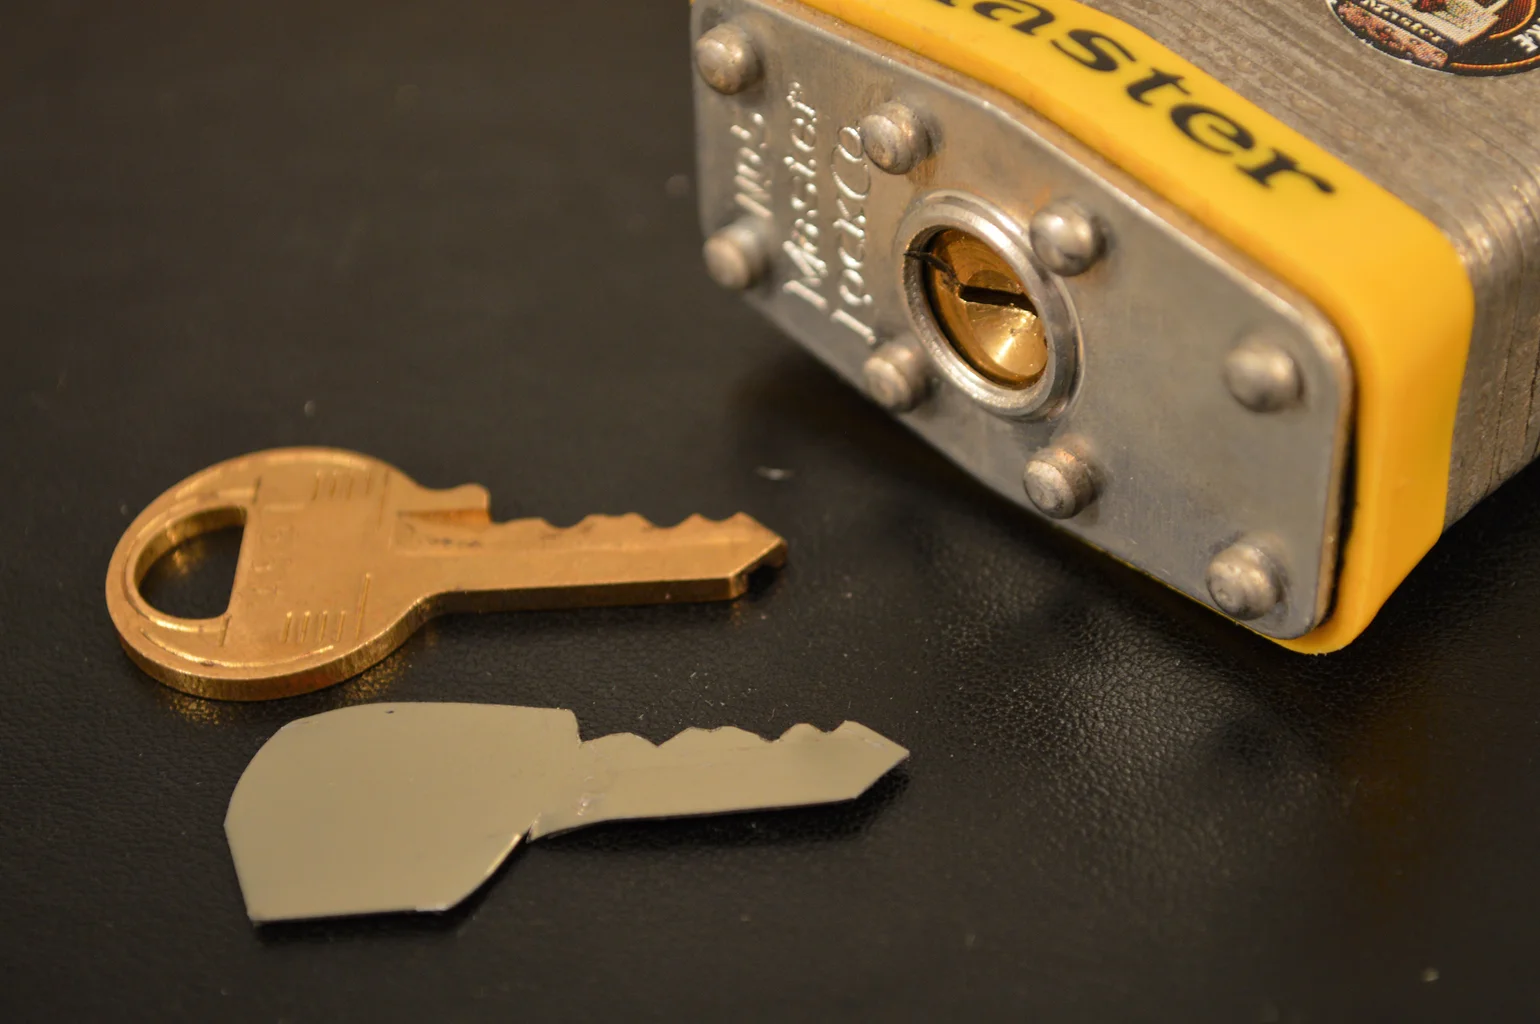 Dubai Locksmith: Your Ultimate Guide to Lock and Key Services